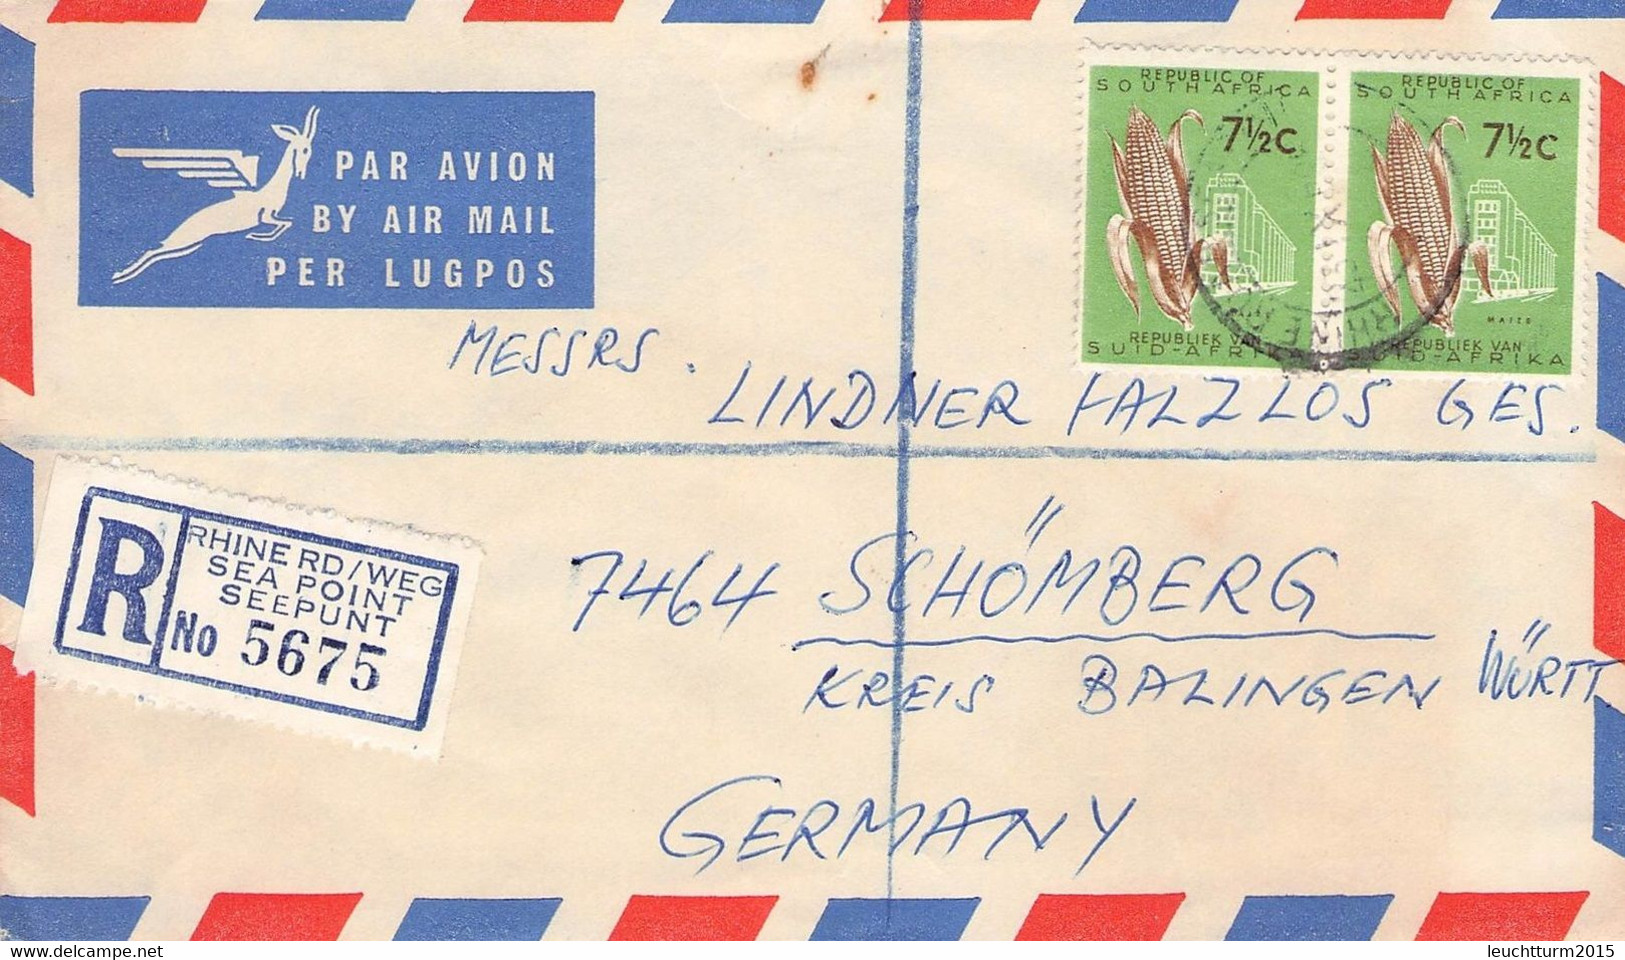 SOUTH AFRICA - AIR MAIL/RECO 1965 SEA POINT - SCHÖMBERG/GERMANY 1965I /ak1017 - Storia Postale